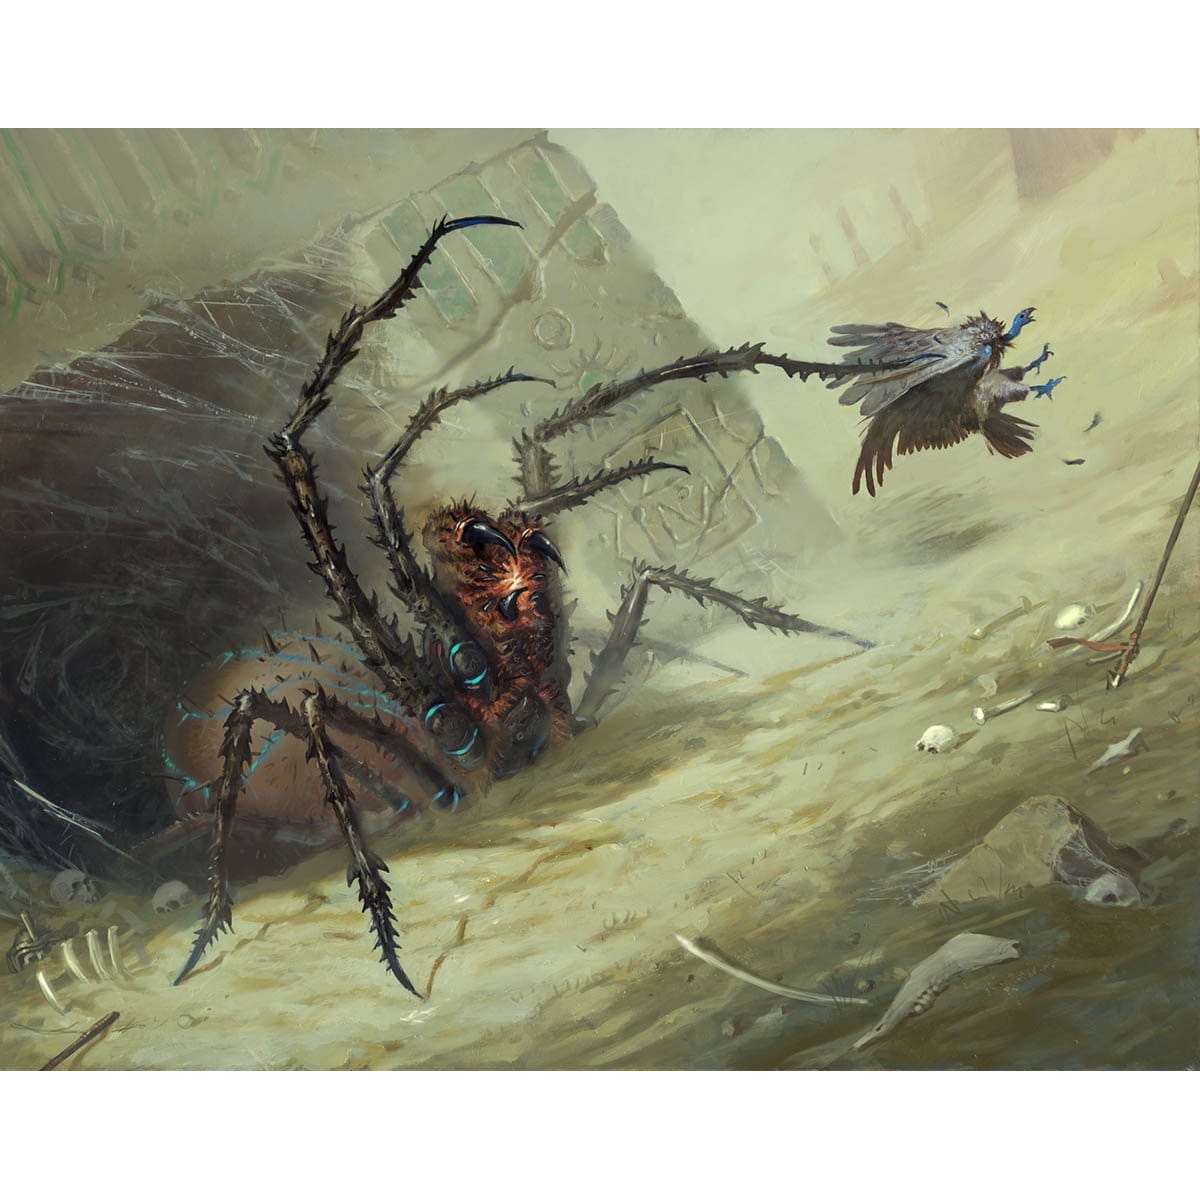 Giant Spider Print - Print - Original Magic Art - Accessories for Magic the Gathering and other card games